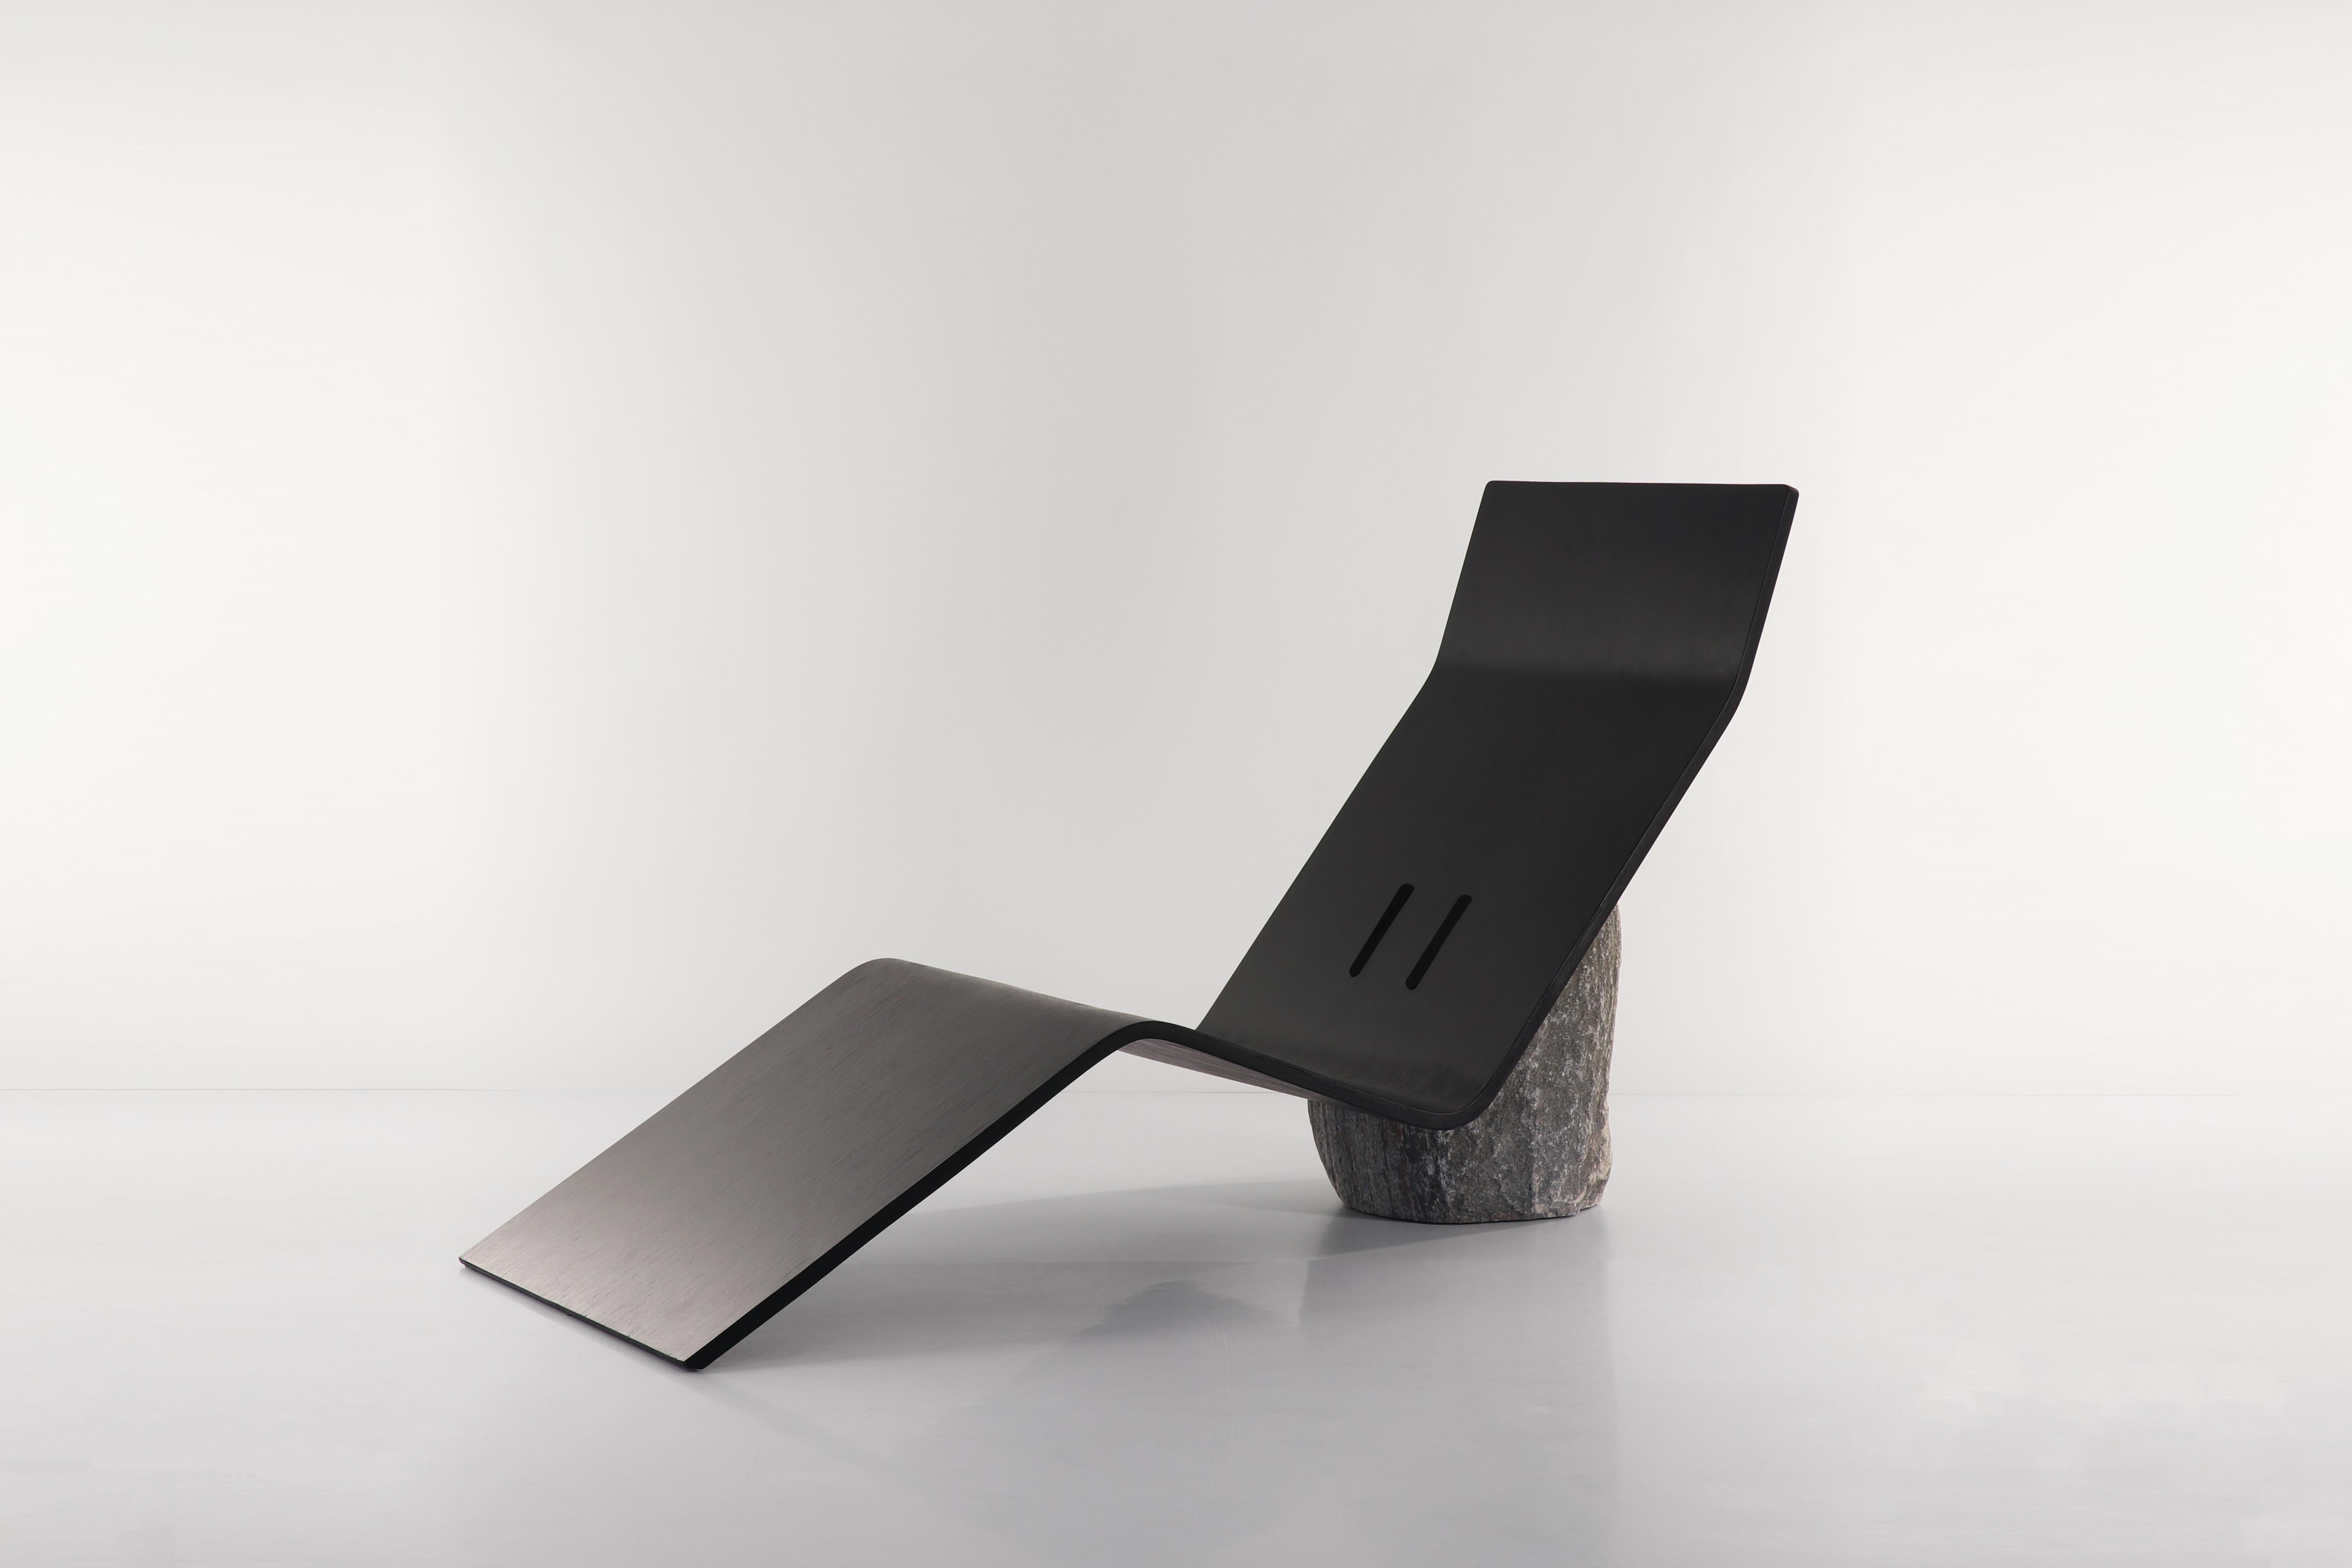 Origin Ply Chaise by Batten and Kamp
Dimensions: W170 x D 53 x H100 cm
Materials: Oak plywood, granite stone, steel fixings.

‘Origin’ and ‘Elsewhere’ are two counterpart lounge chairs. ‘Origin’ features a minimal and earthy jet black plywood seat